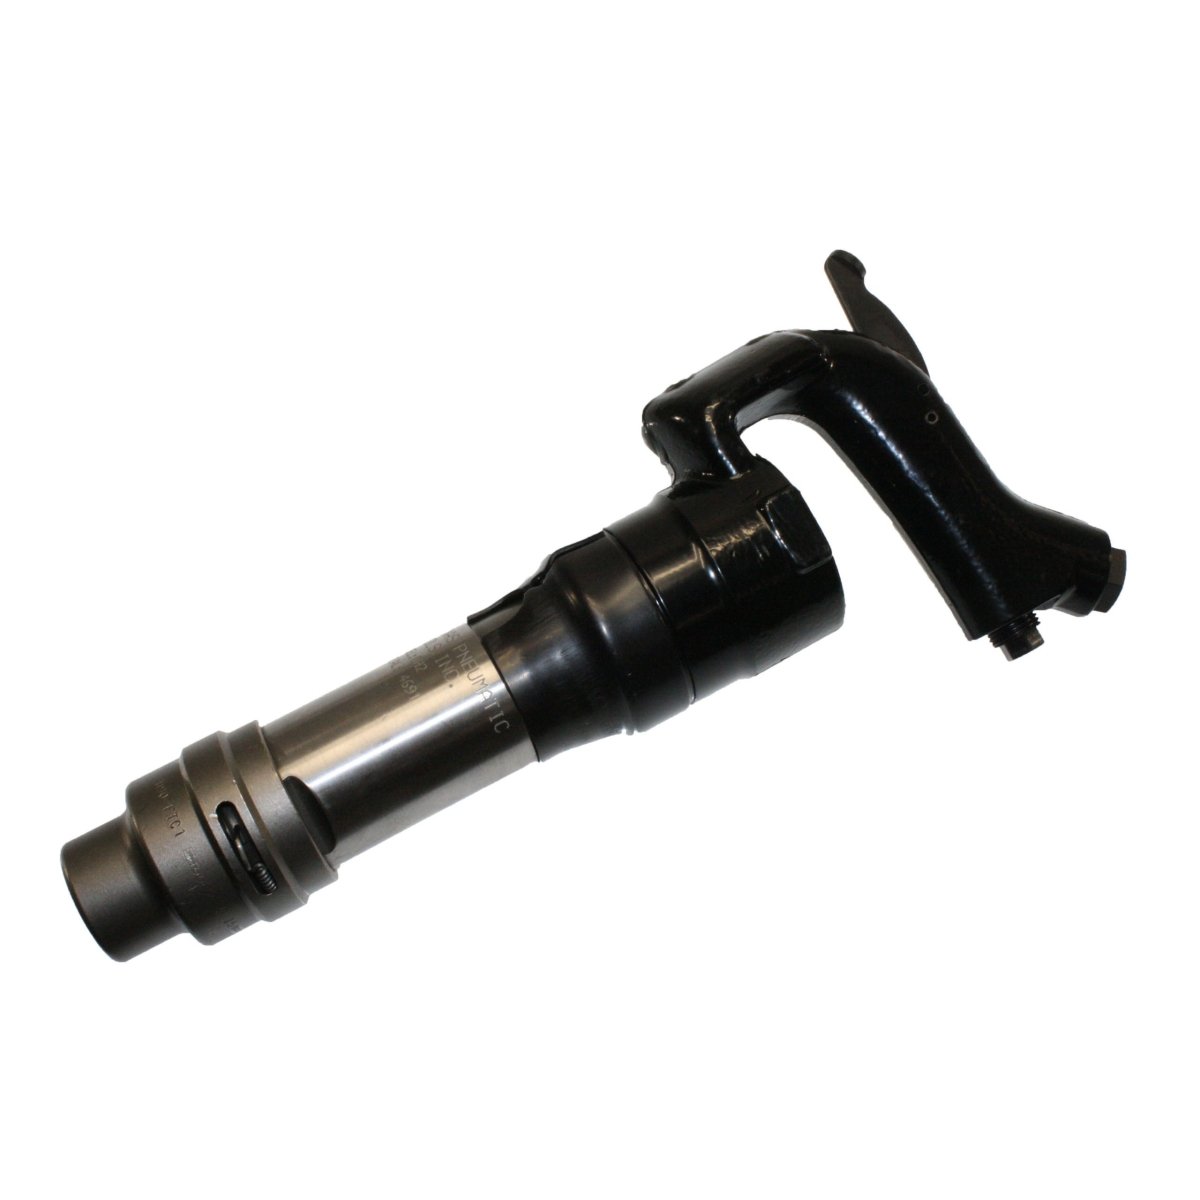  Hex Bushing & Forged Handle - Texas Pneumatic Tools